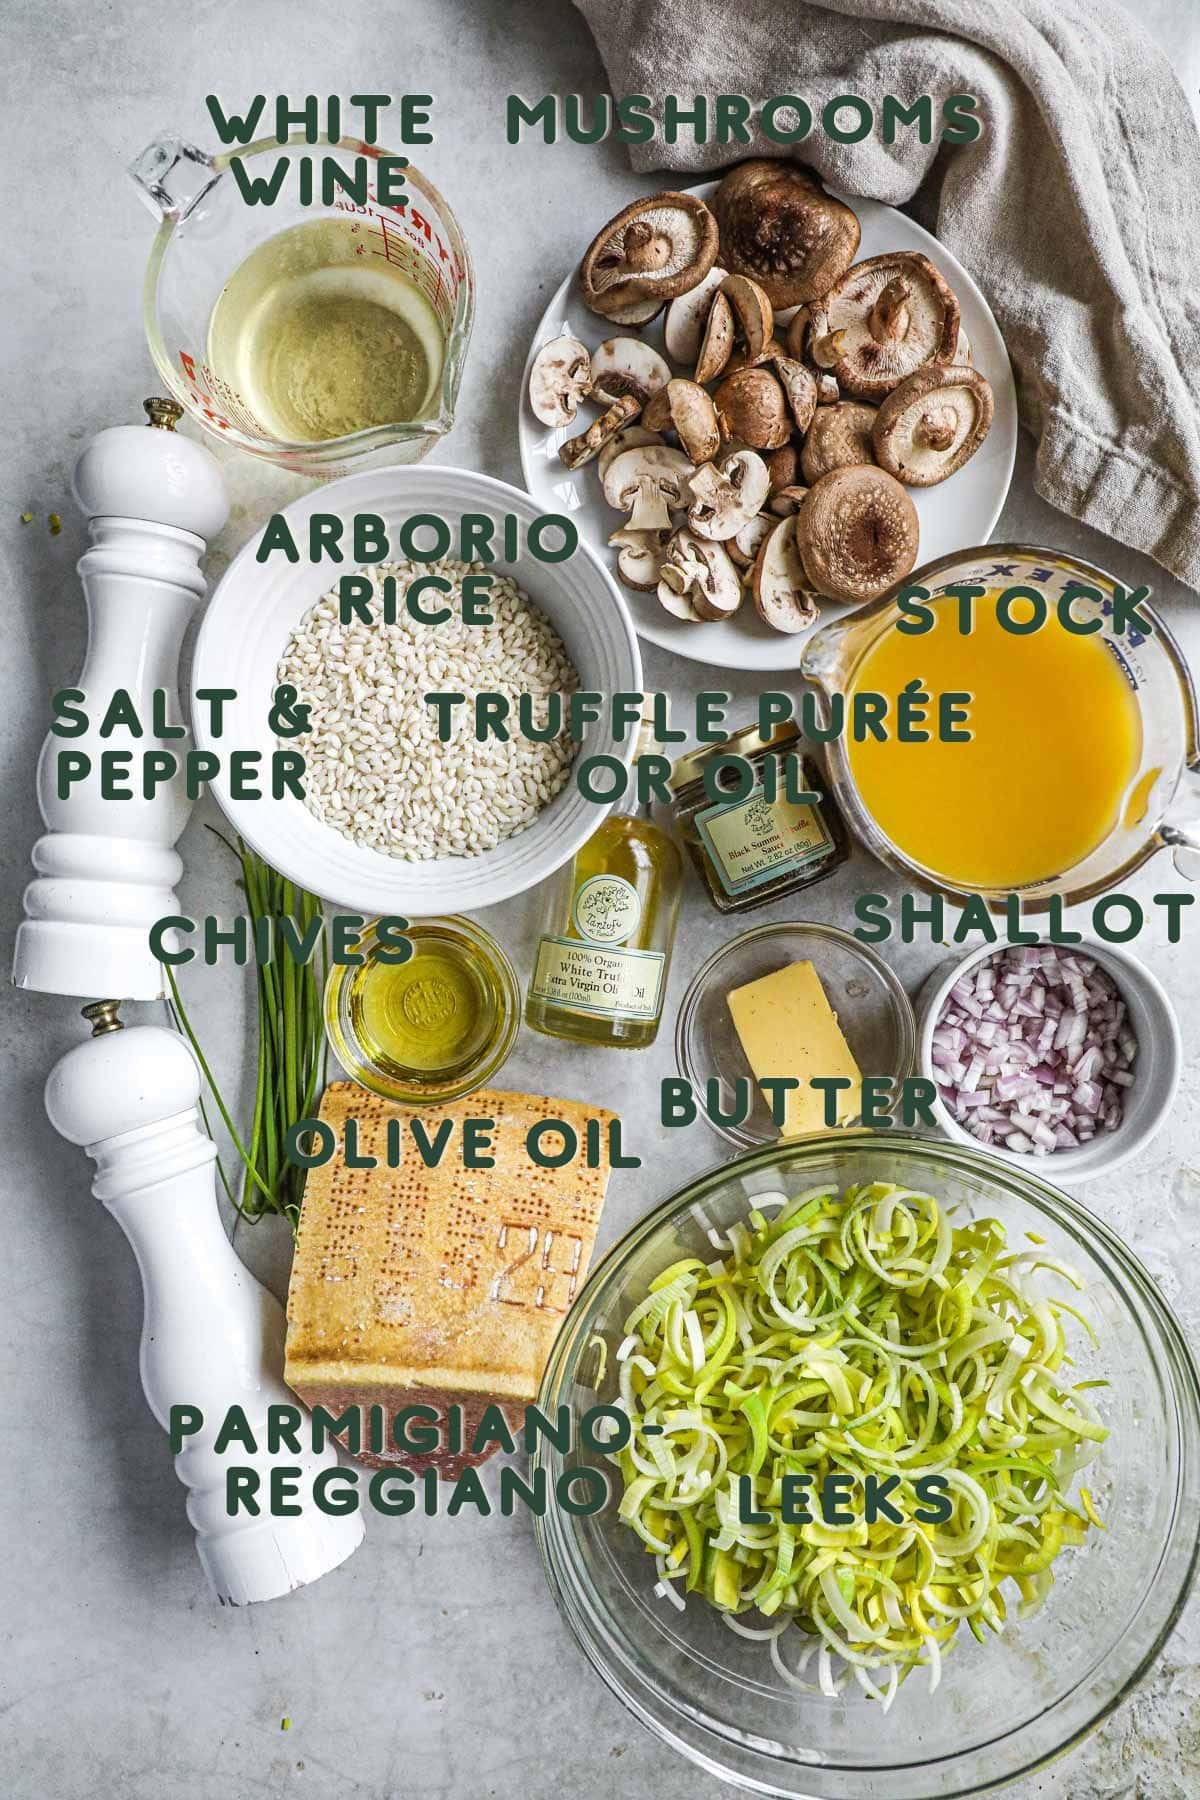 Ingredients to make truffle mushroom leek risotto, including leeks, shallots, truffle purée and oil, arborio rice, mushrooms (crimini and shiitake), chicken or vegetable stock, and white wine.